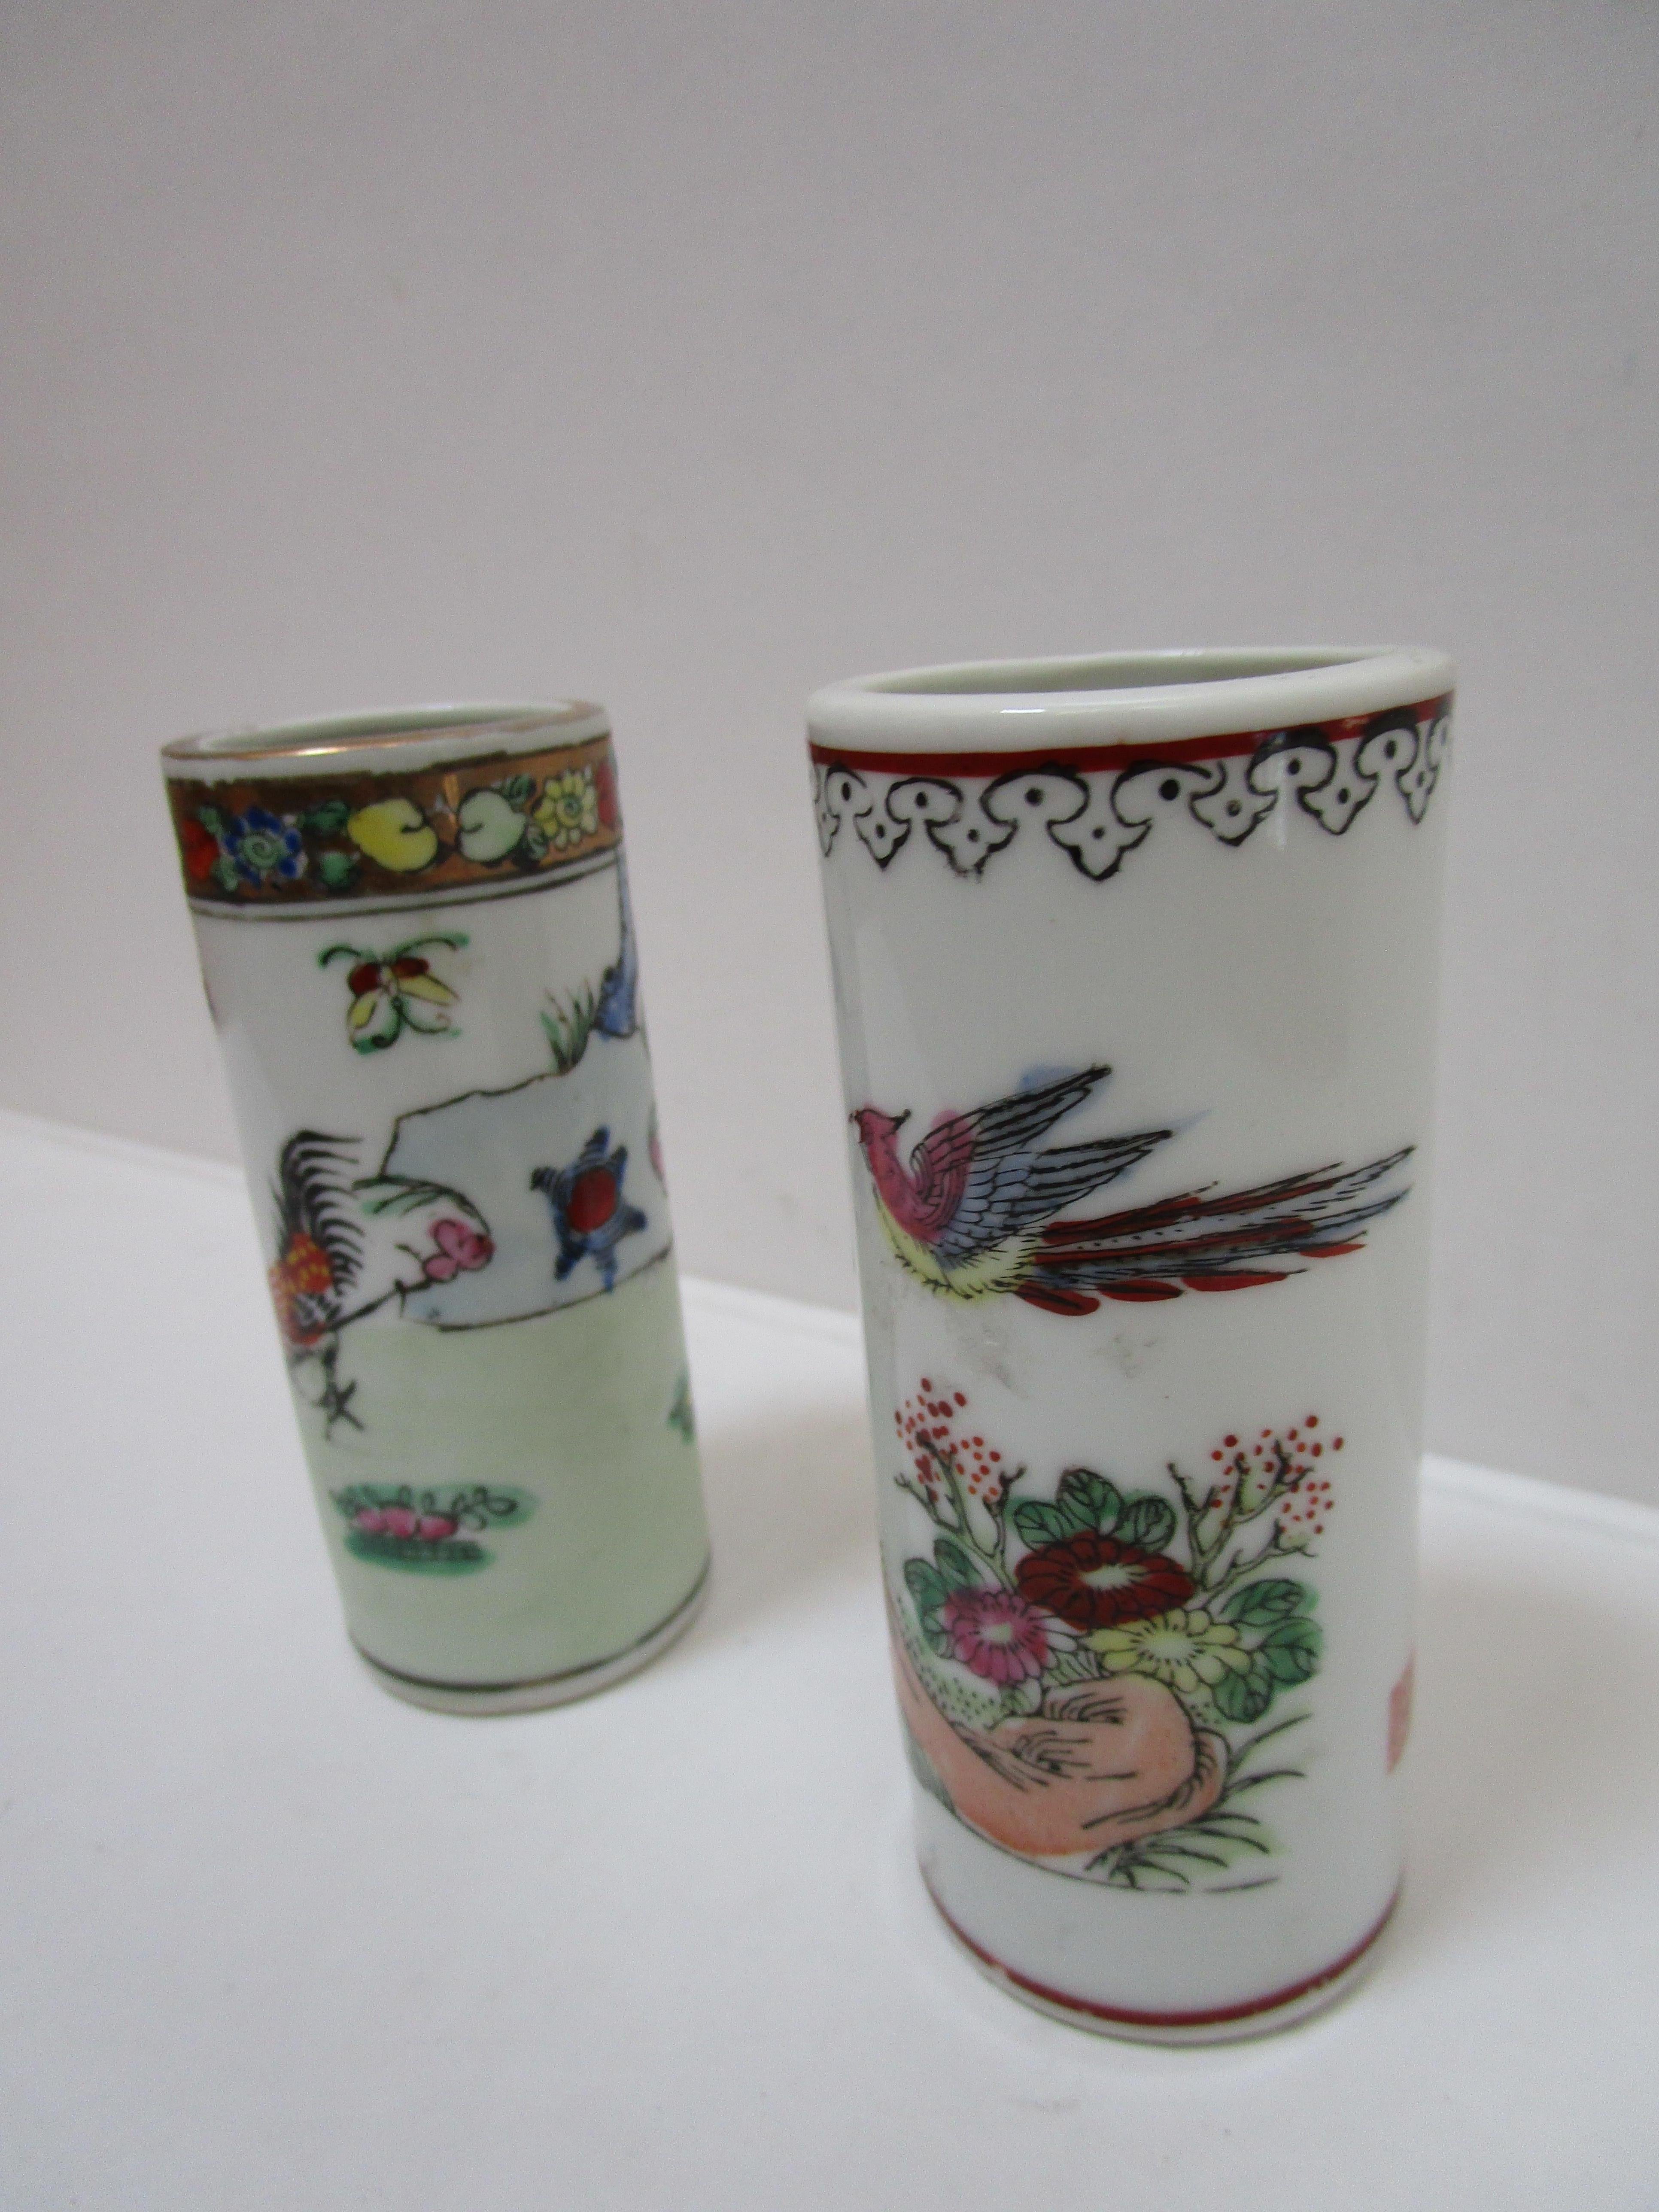 One of the pieces in this famille rose pair of brush pots bears an iron red square hallmark, as well as four columns of Chinese characters in a poem. The design that encircles the pots feature various flowers, two roosters on the ground on one and a